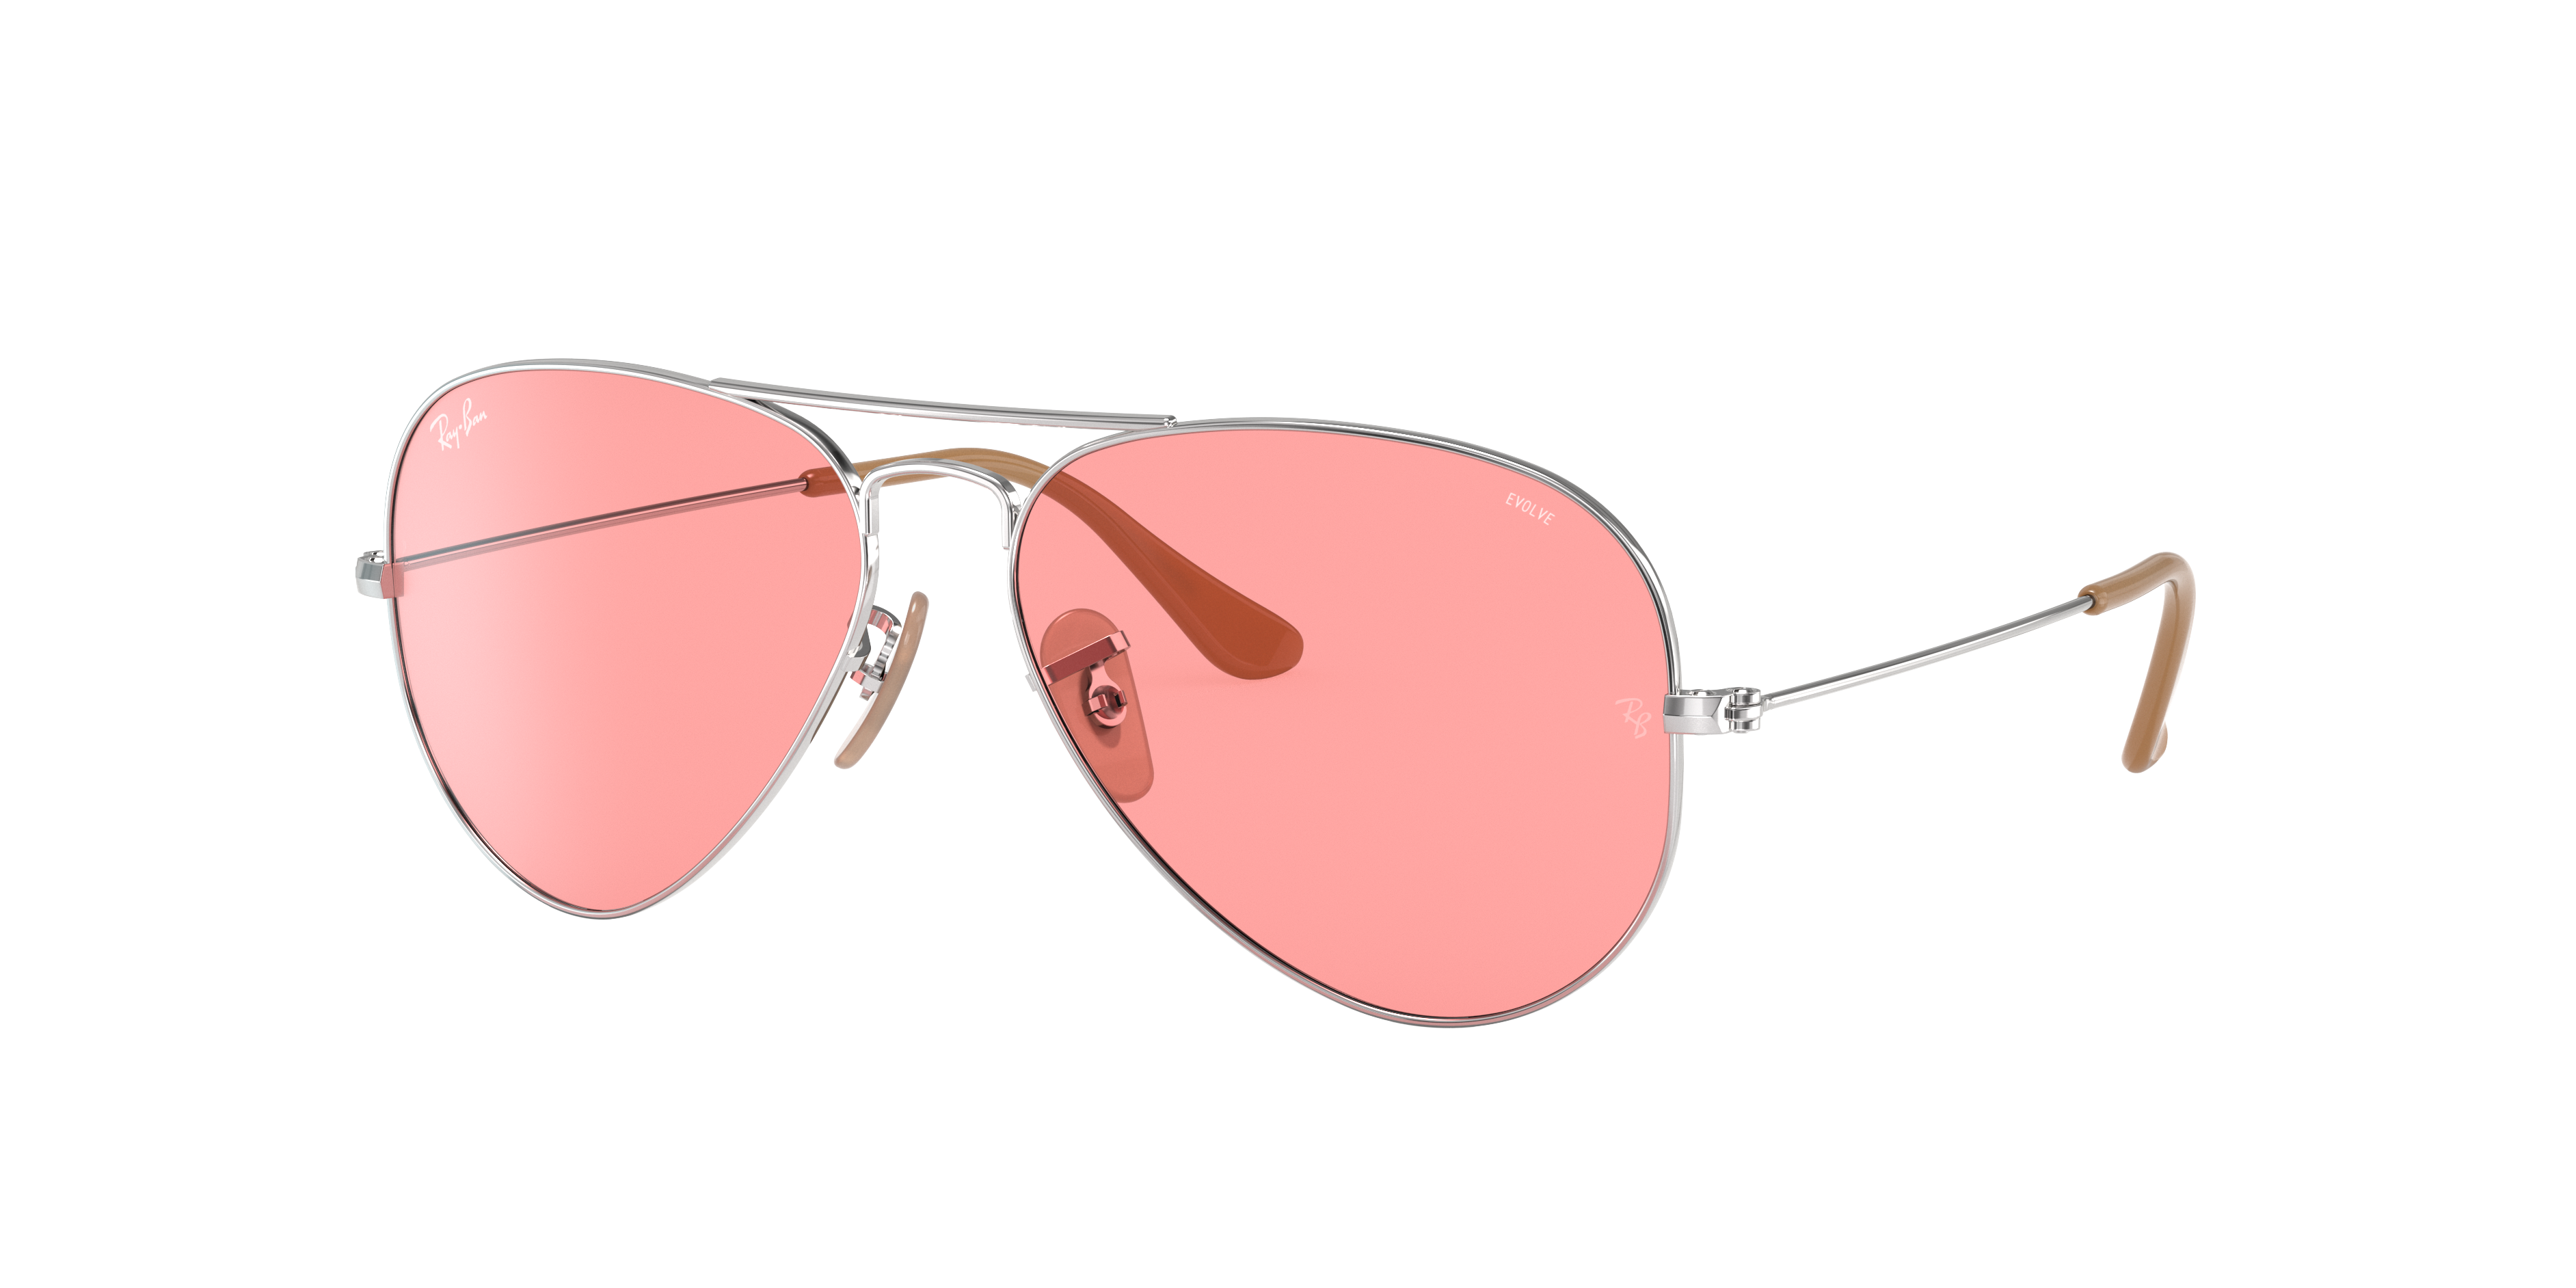 Ray Ban Aviator Washed Evolve Rb3025 Silver Metal Pink Lenses 0rbv758 Ray Ban Uk